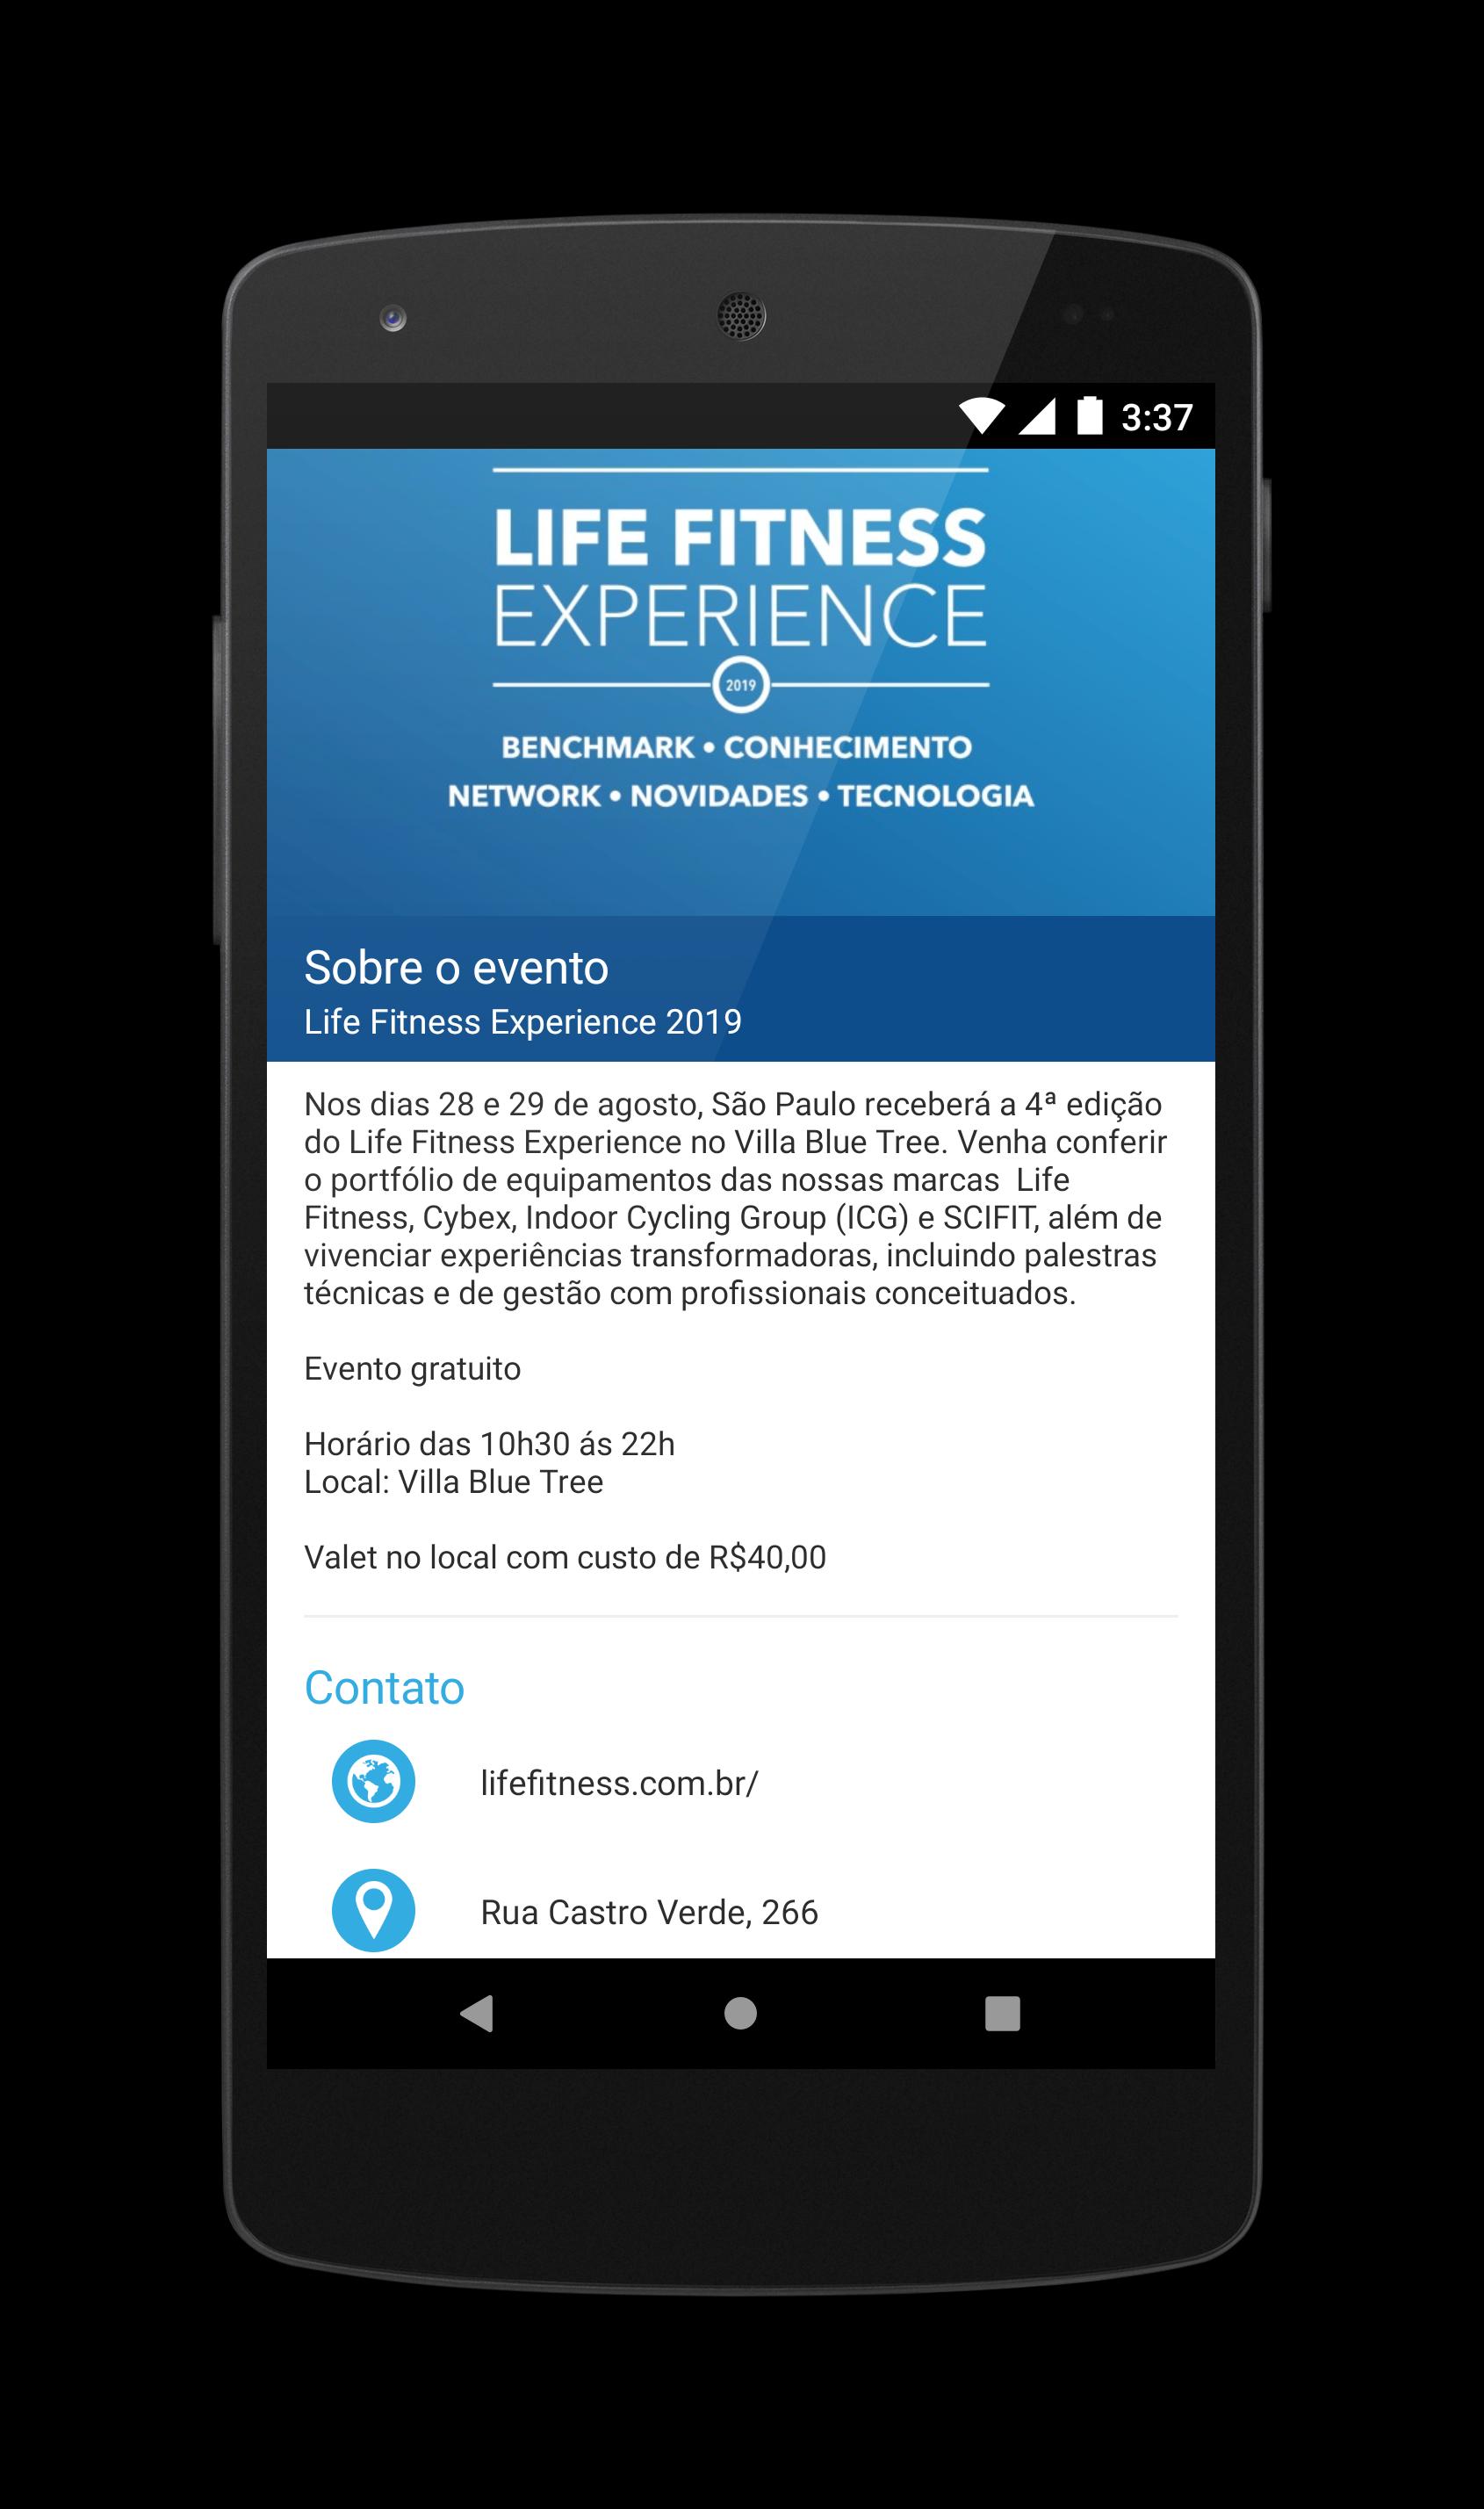 Life Fitness Experience 2019 for Android - APK Download